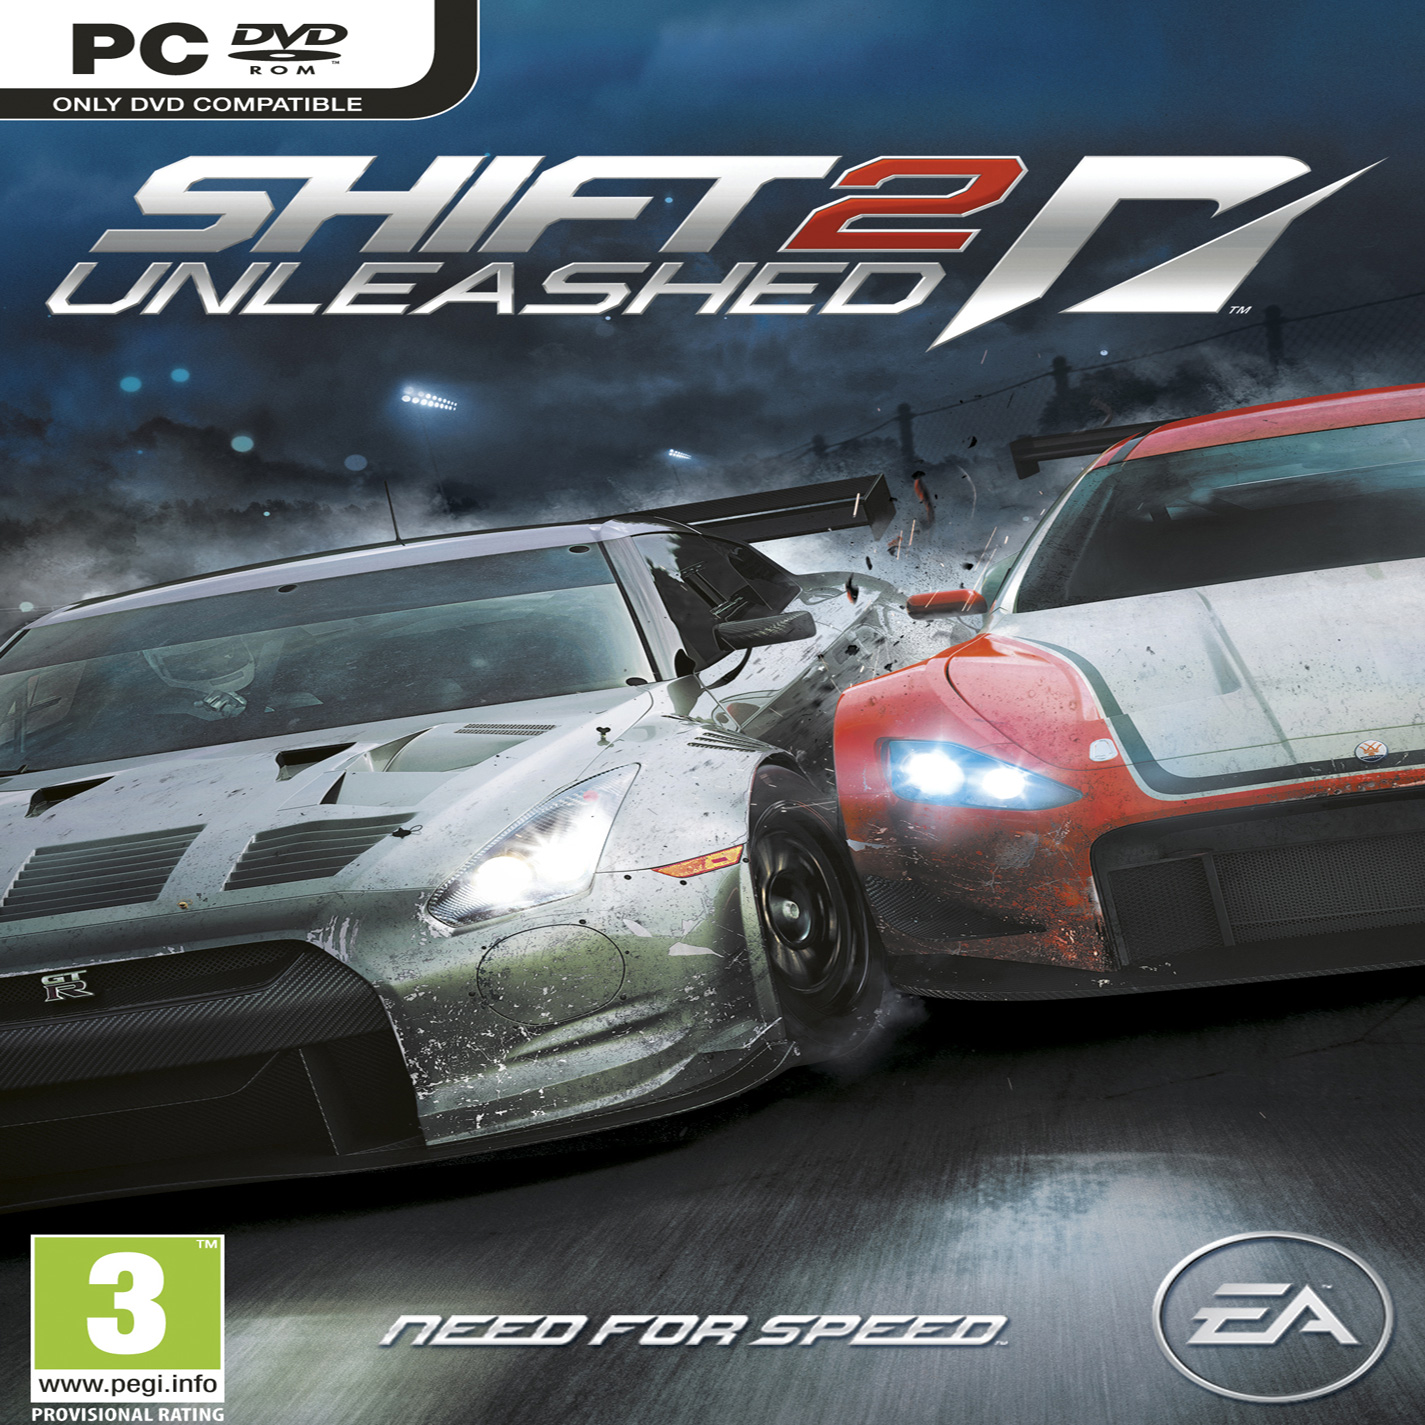 Need for Speed Shift 2: Unleashed - pedn CD obal